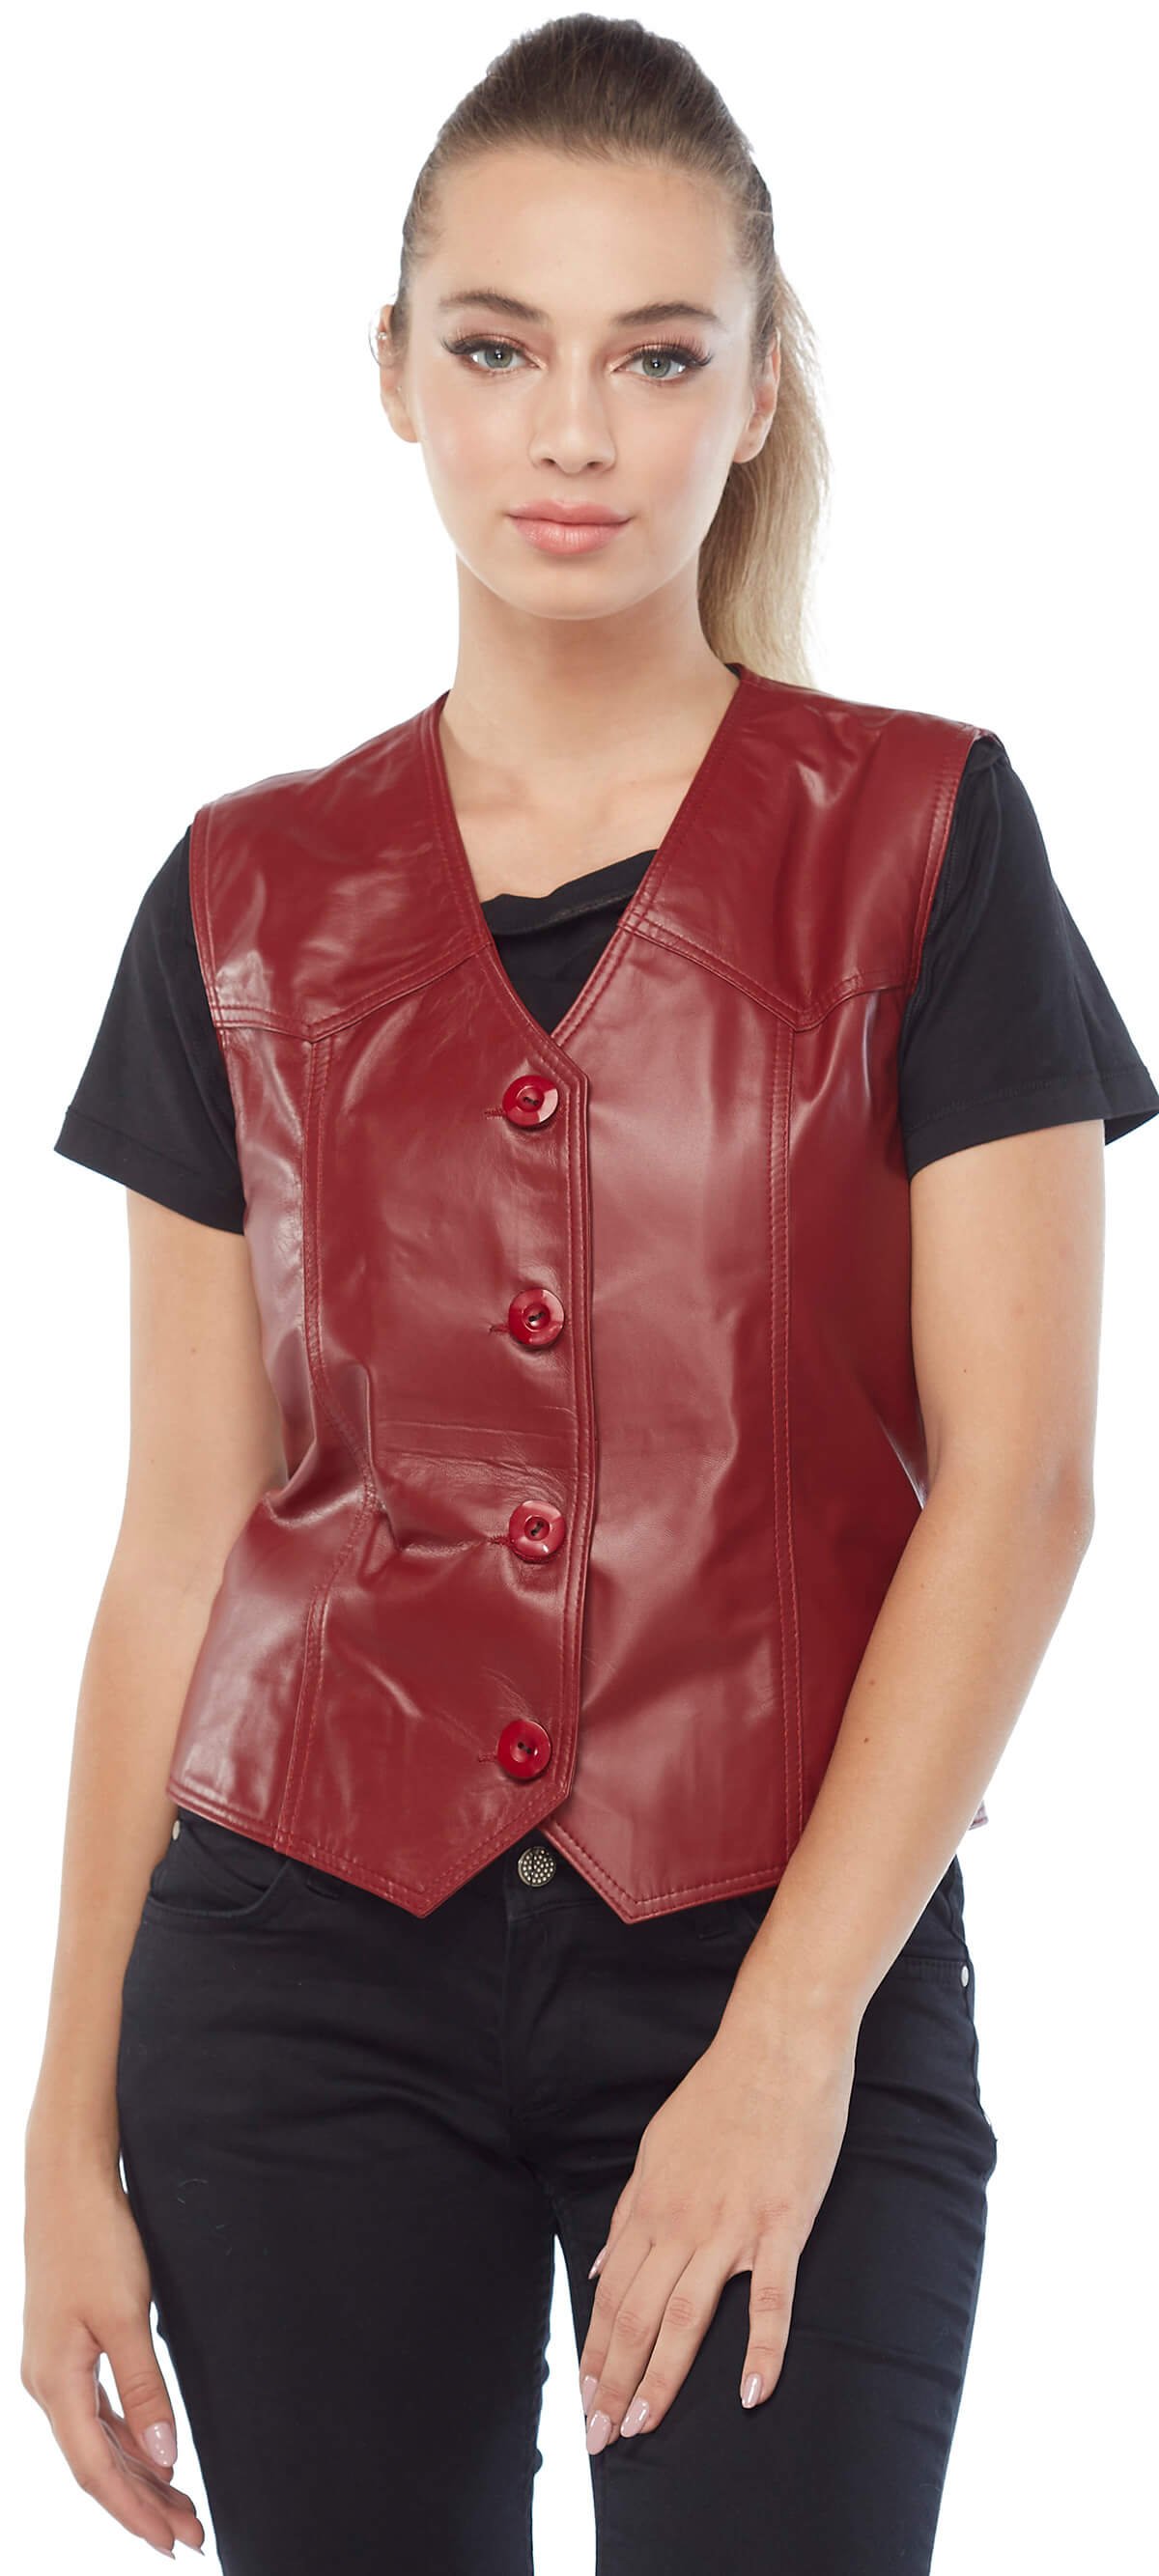 Genuine Leather Women's Leather Vest Red